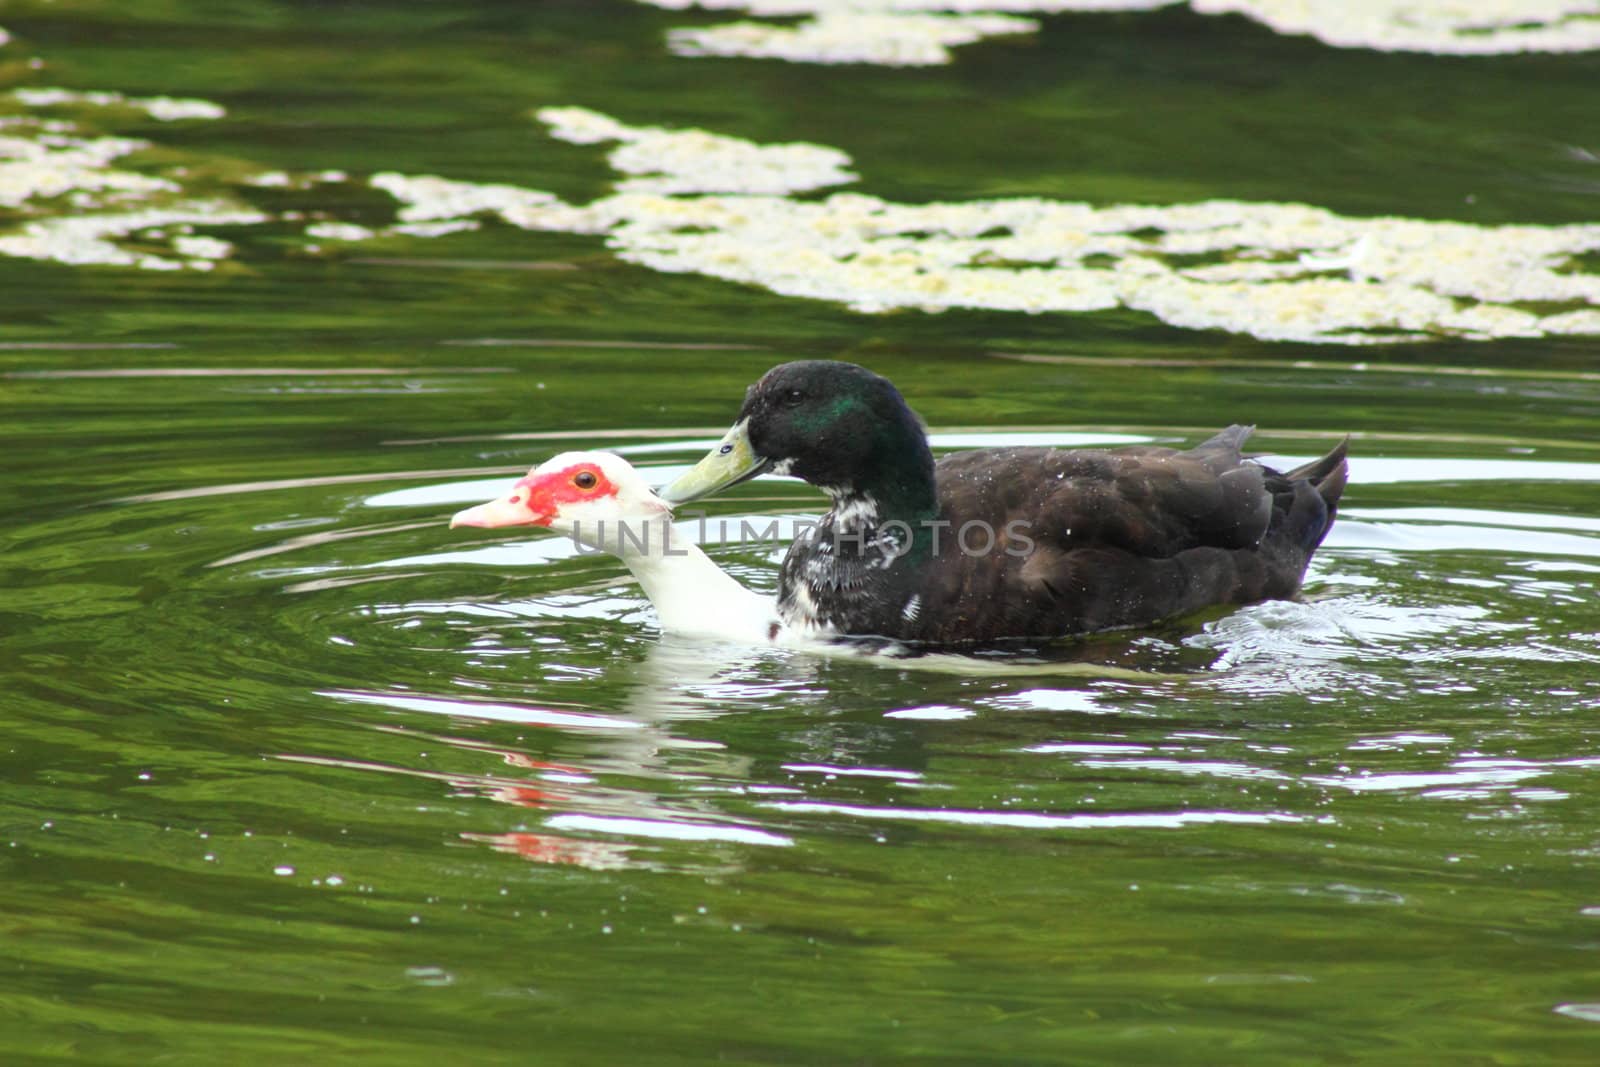 A Muscovy and a mallard duck mating in the water.